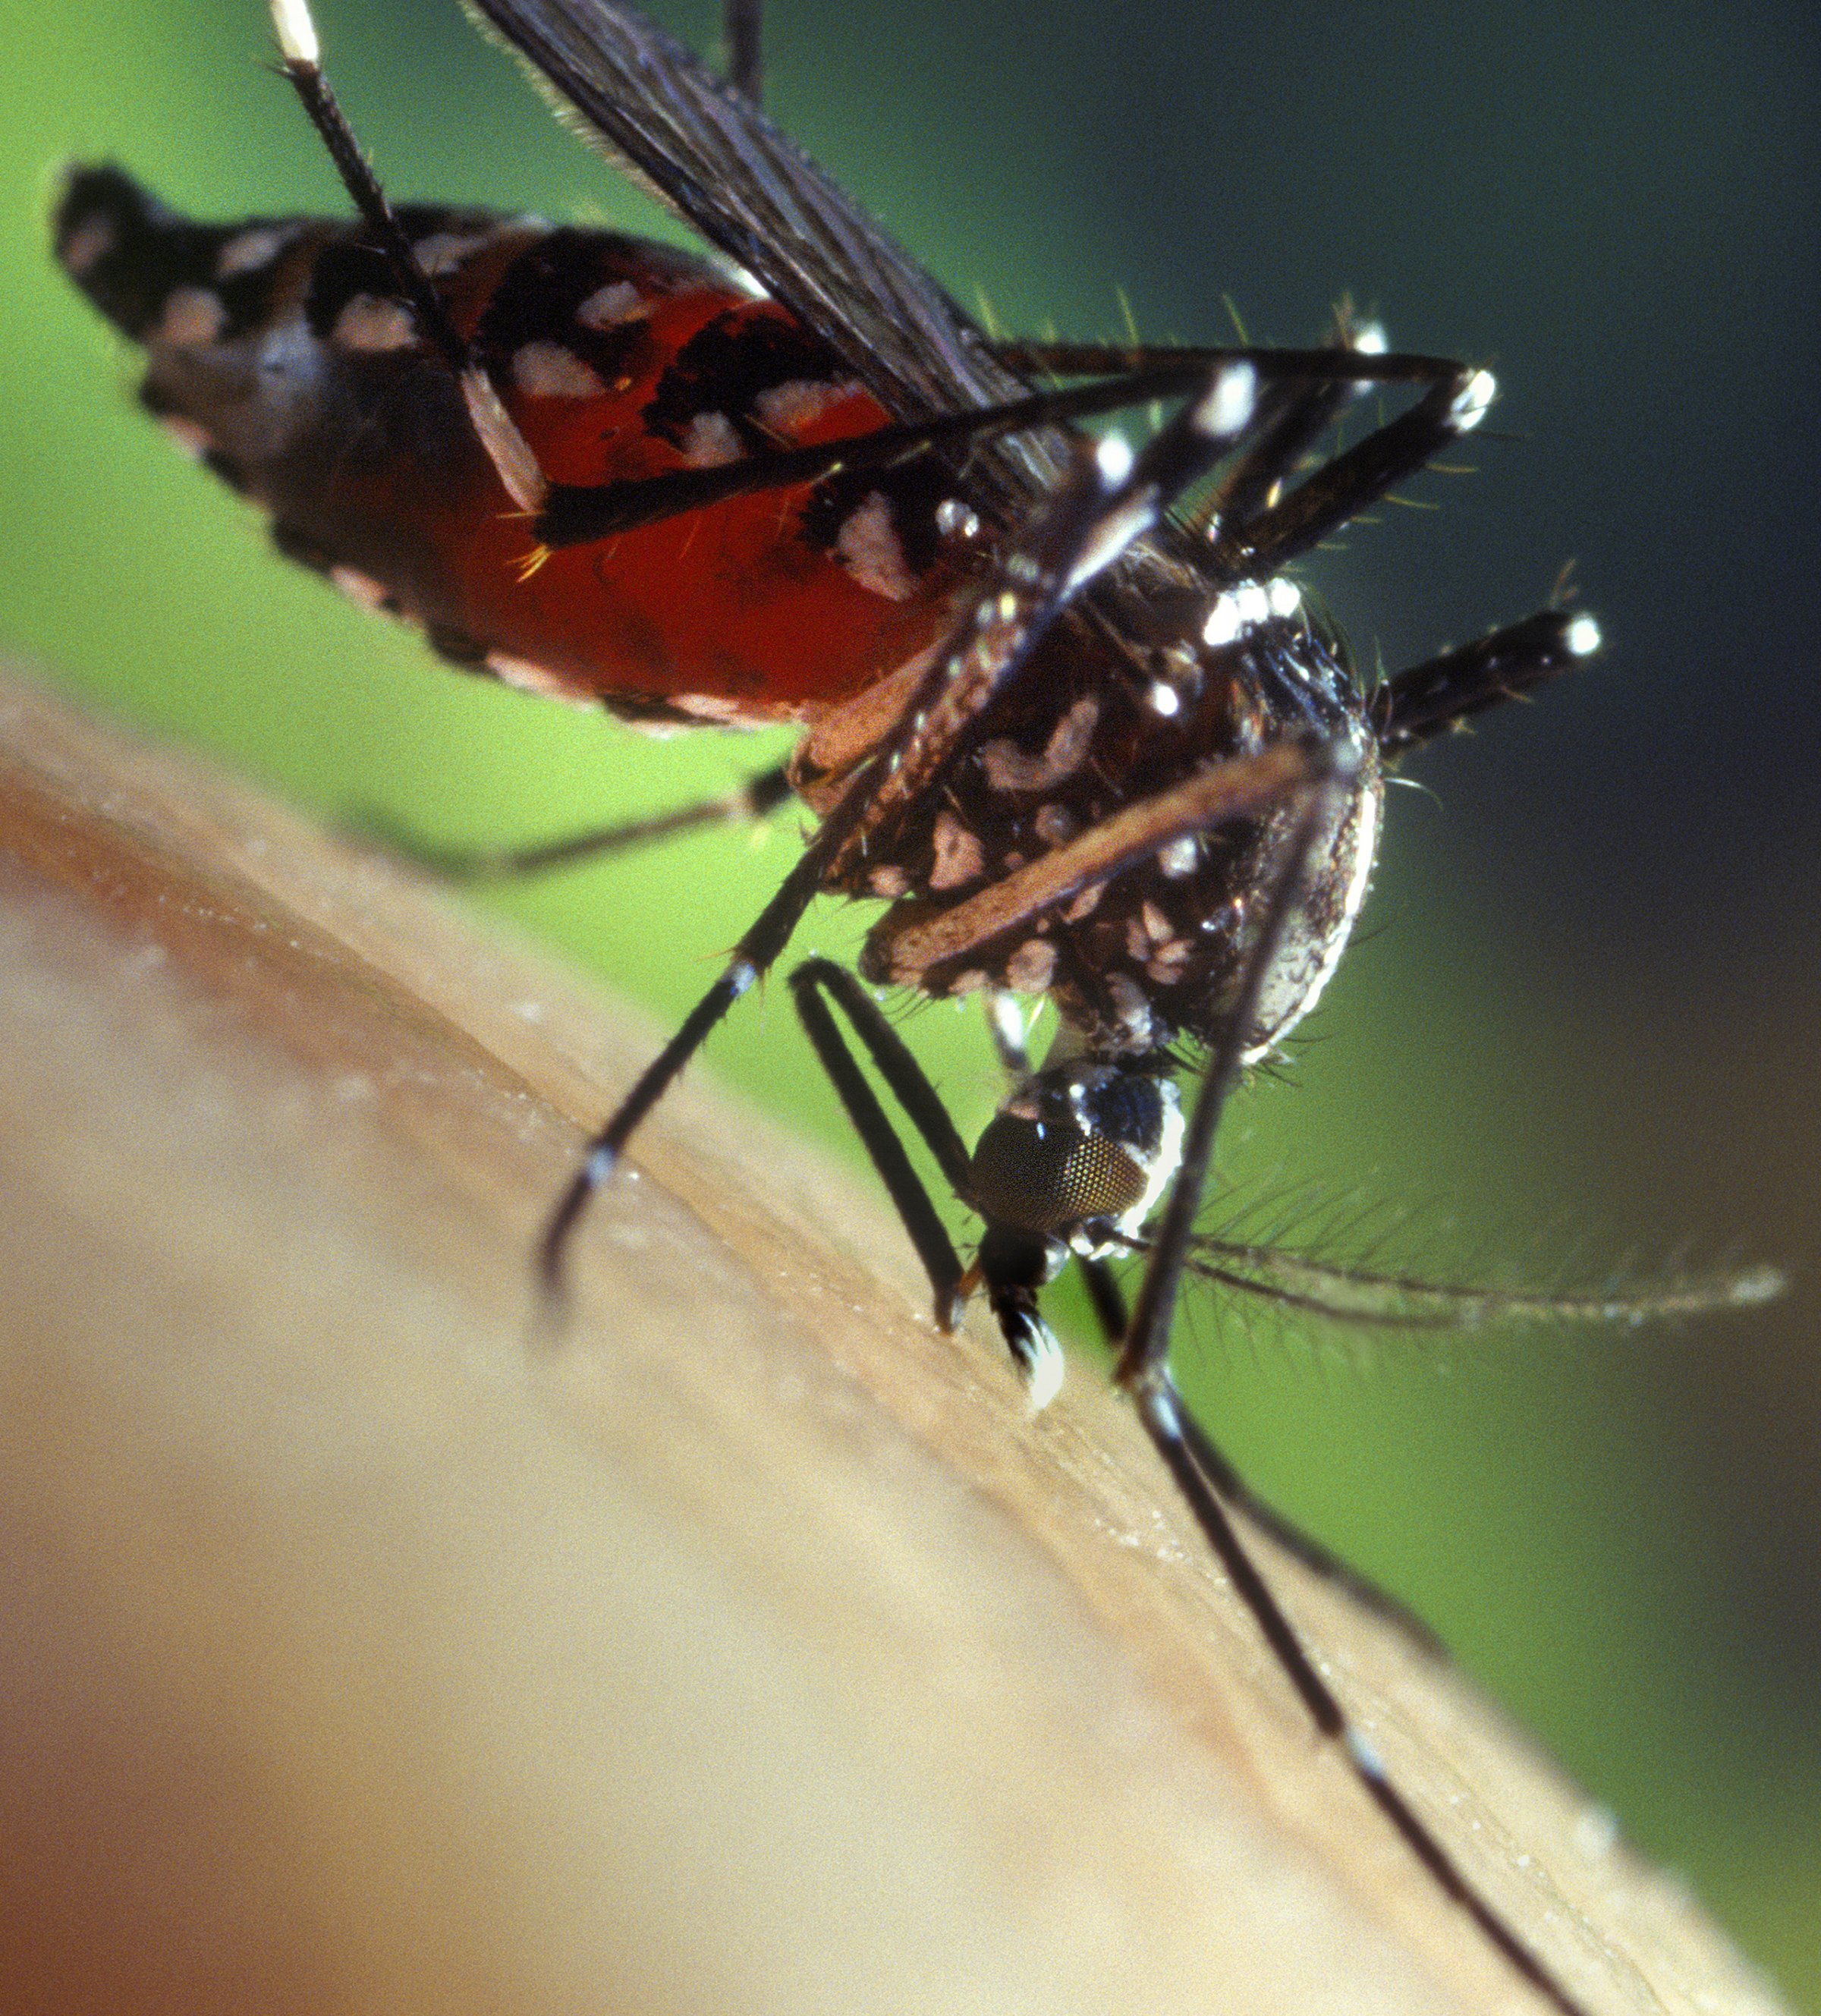 A blood-engorged female Aedes albopictus mosquito feeding on a human host, 2002.